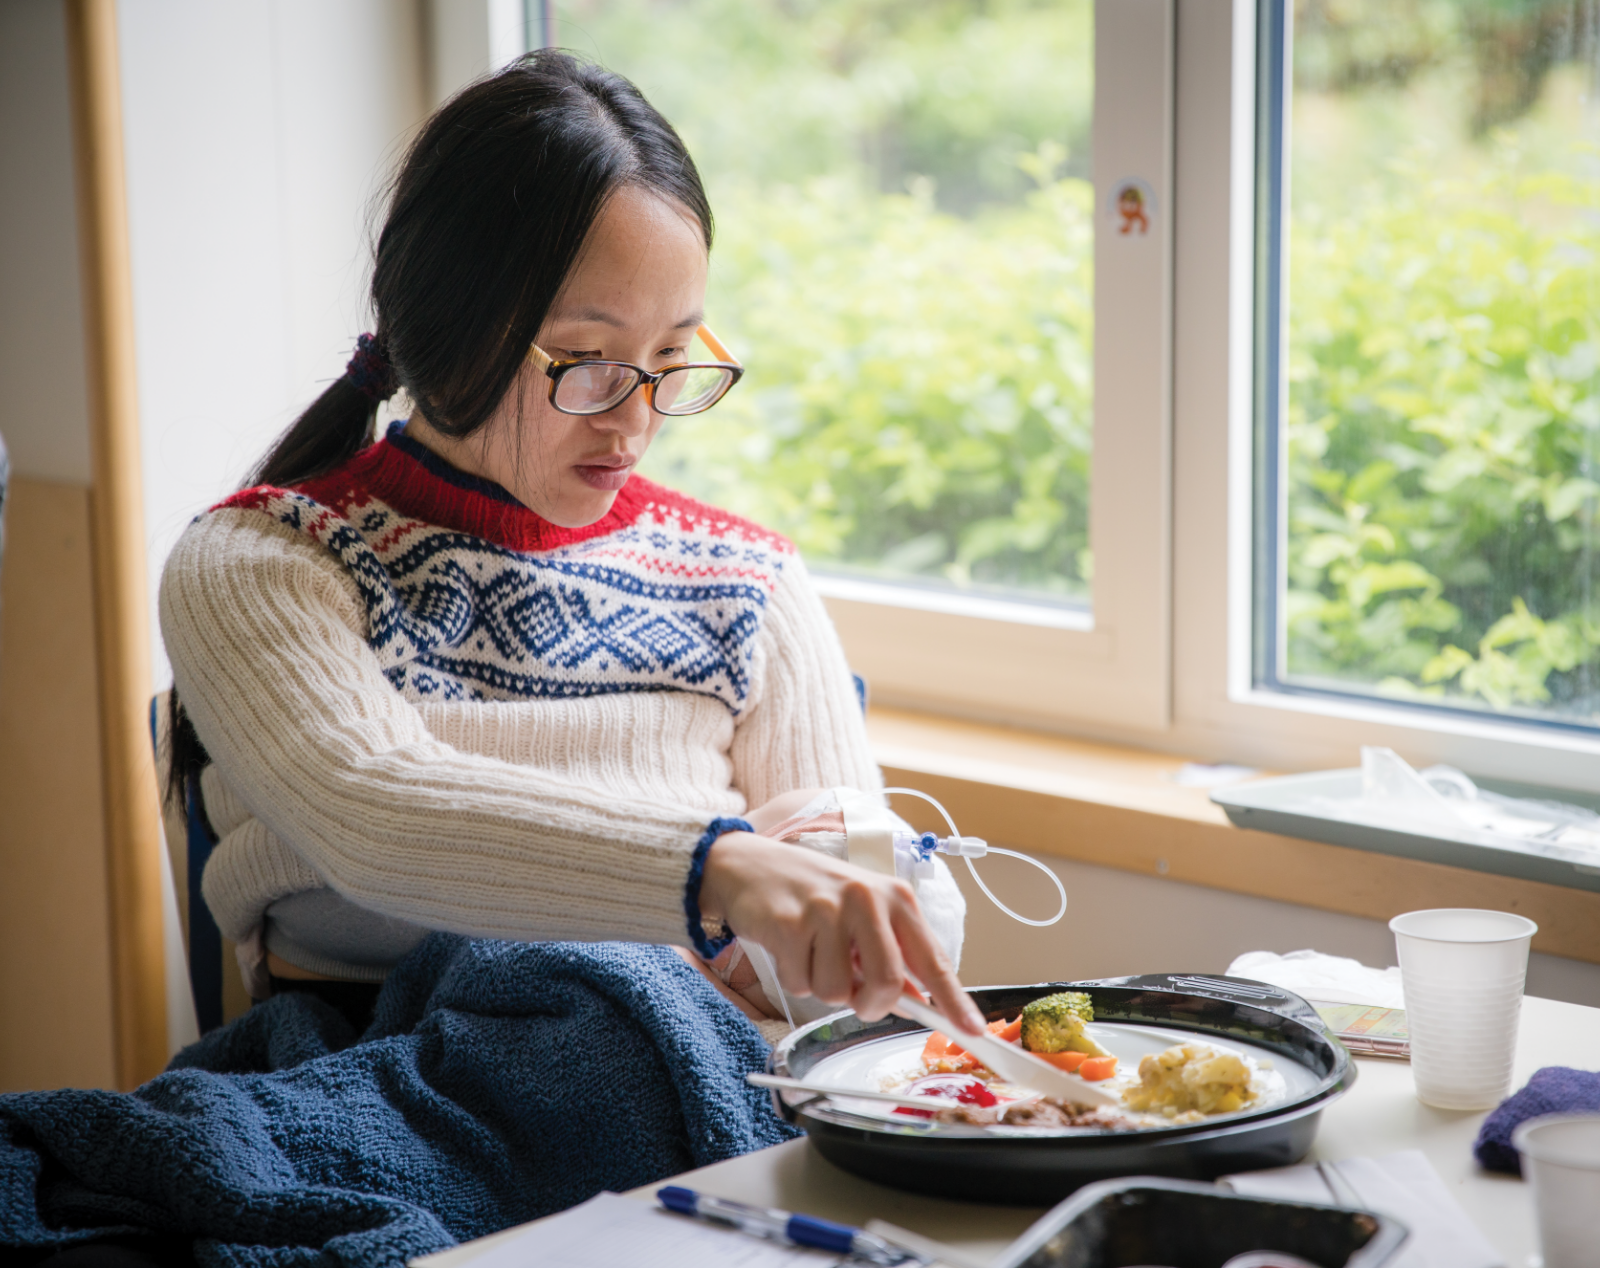 Asian woman in glasses eating lunch while getting iv infusion at home